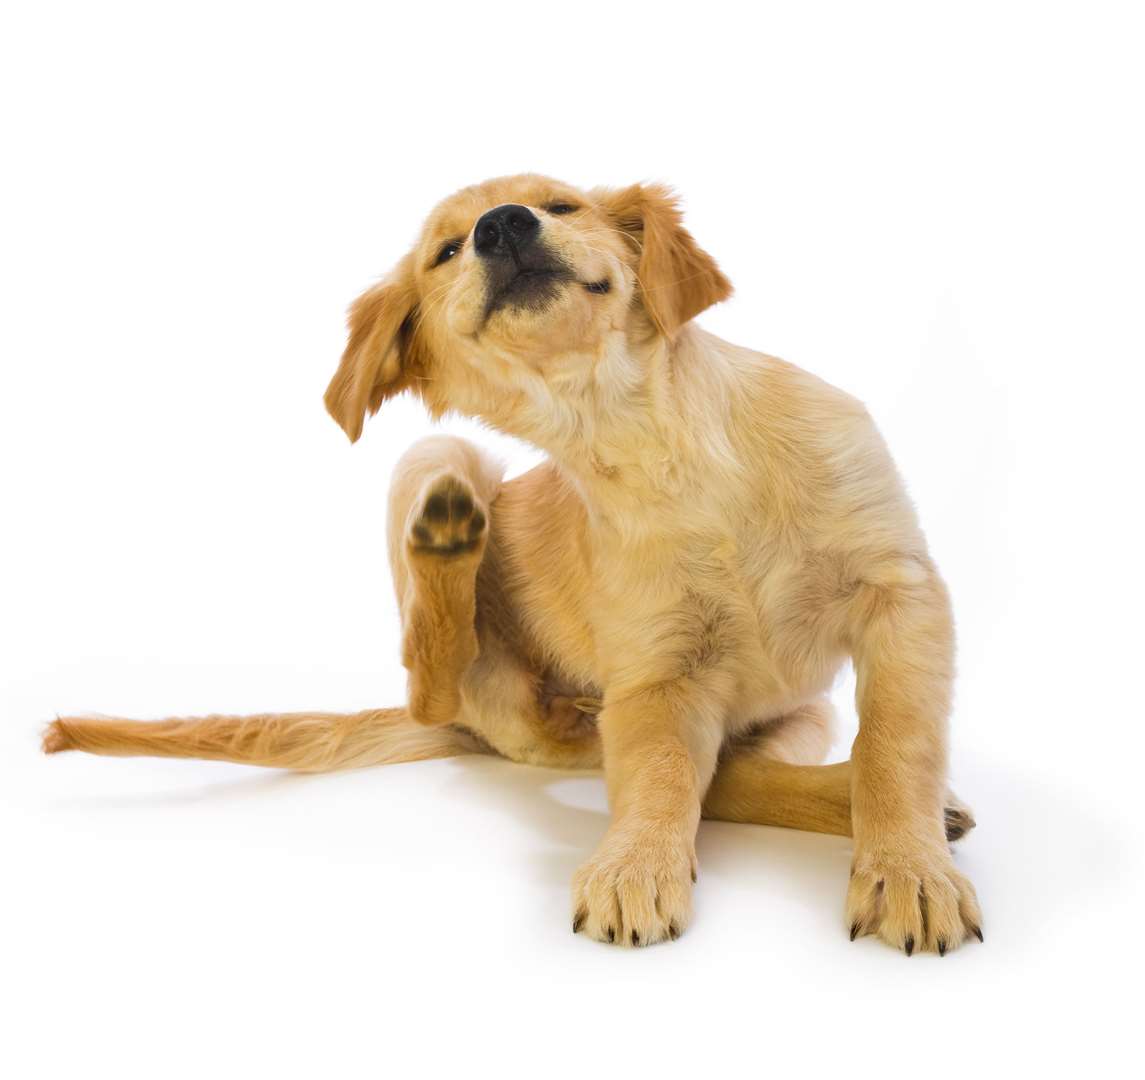 A Golden Retriever puppy scratching at fleas. Picture: istock/cmannphoto